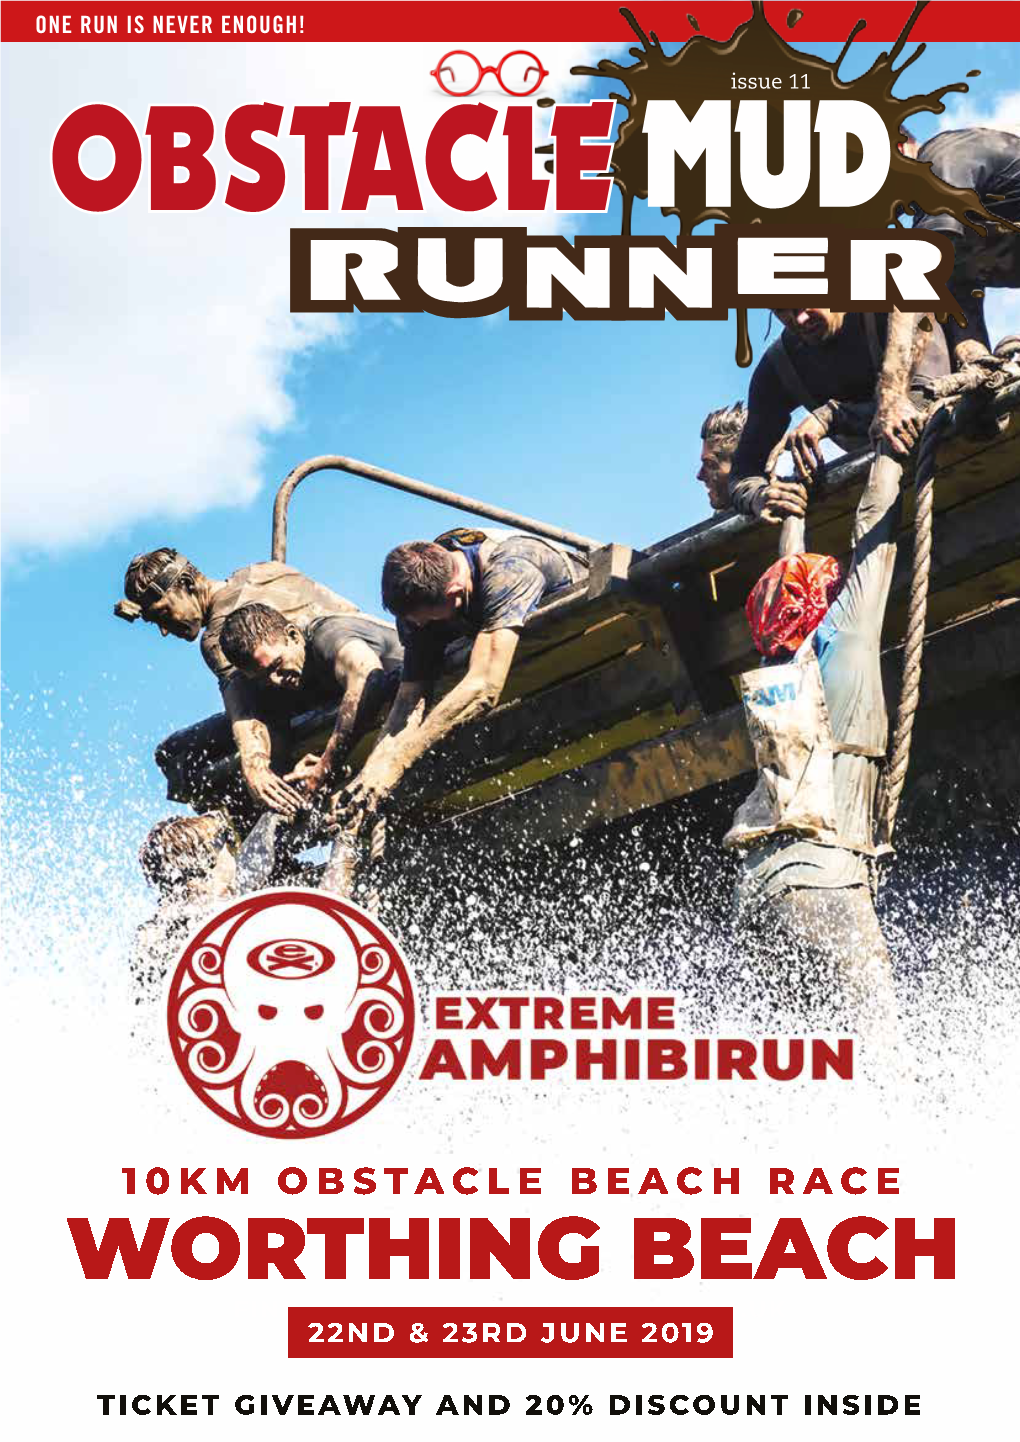 Obstacle Mud Runner This Magazine Isn’T Just for You Lot, but for Your Friends Too